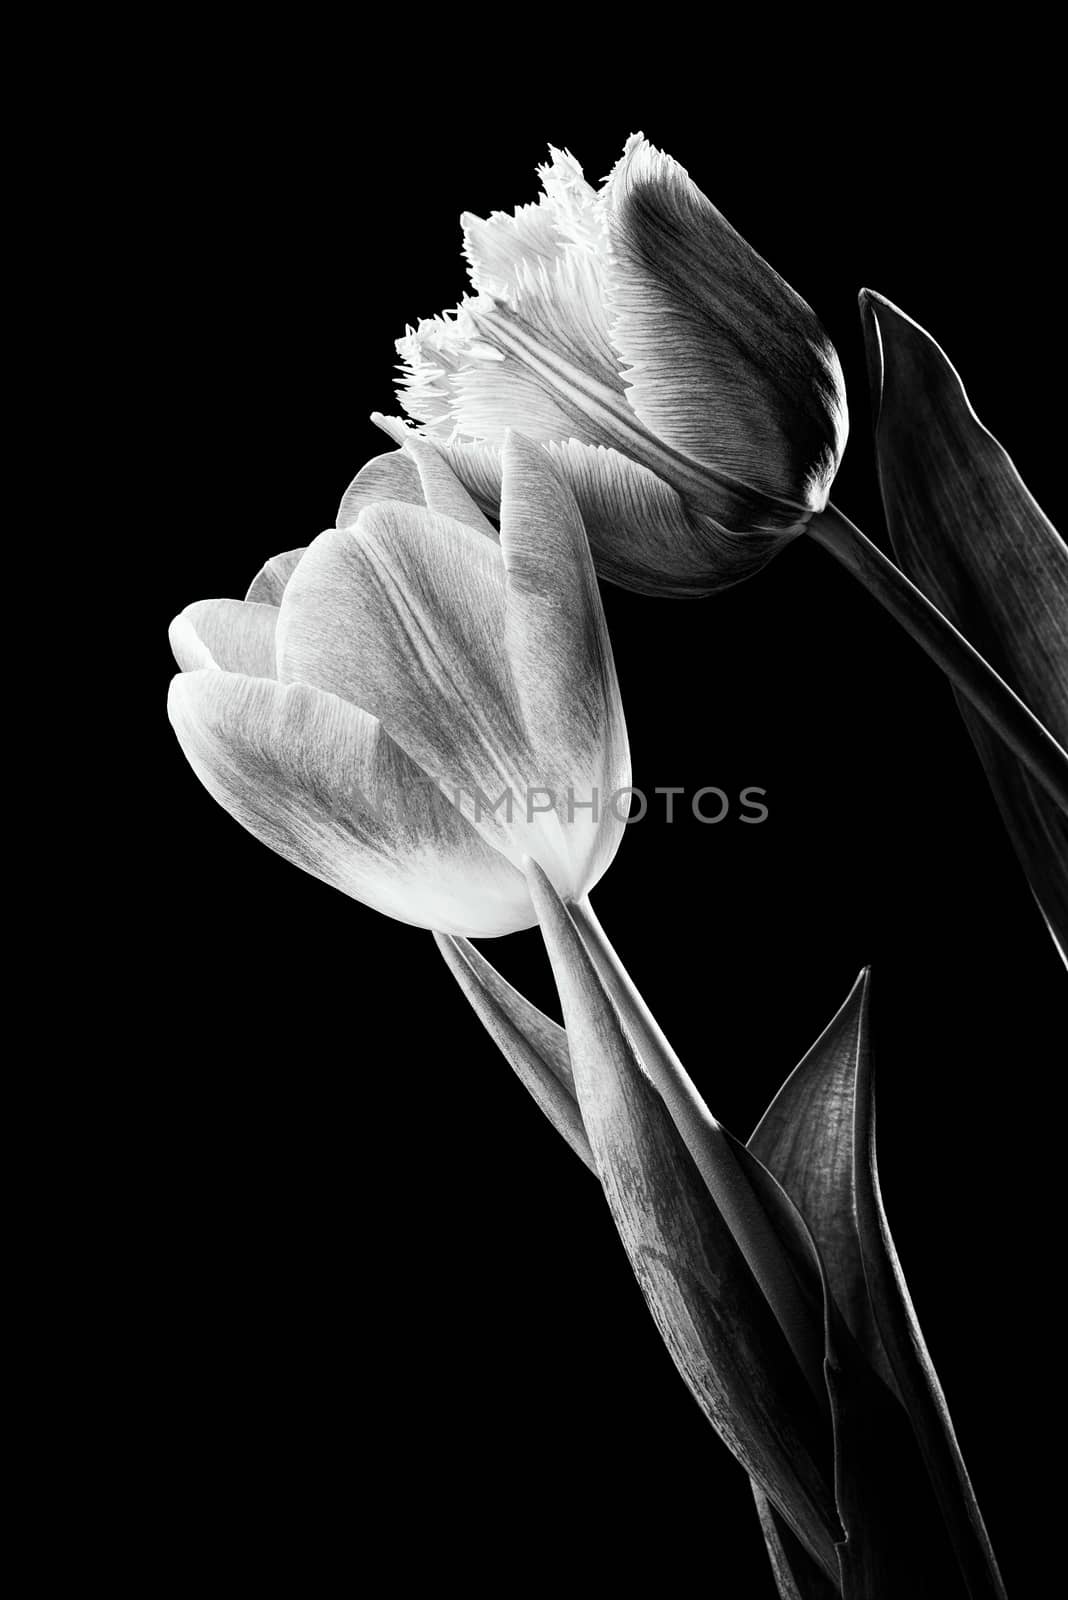 Closeup of a pink fringed tulip, tulipa crispa, and a common red tulip on black background. Black and white photo.